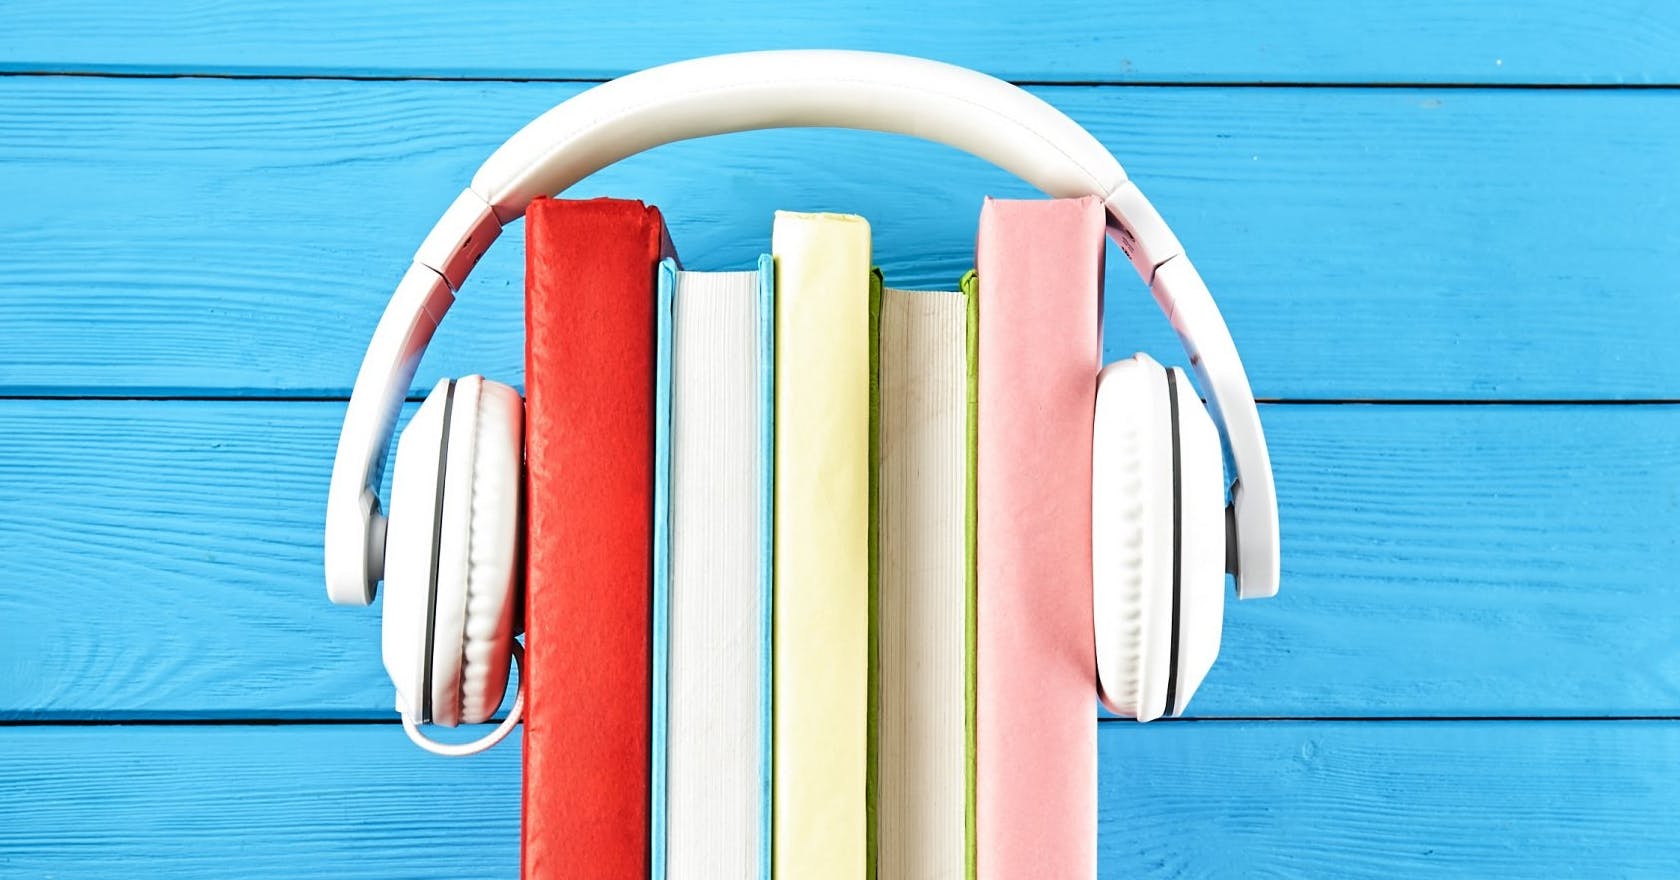 Best Audiobooks Narrated By The Author Actors Celebrities